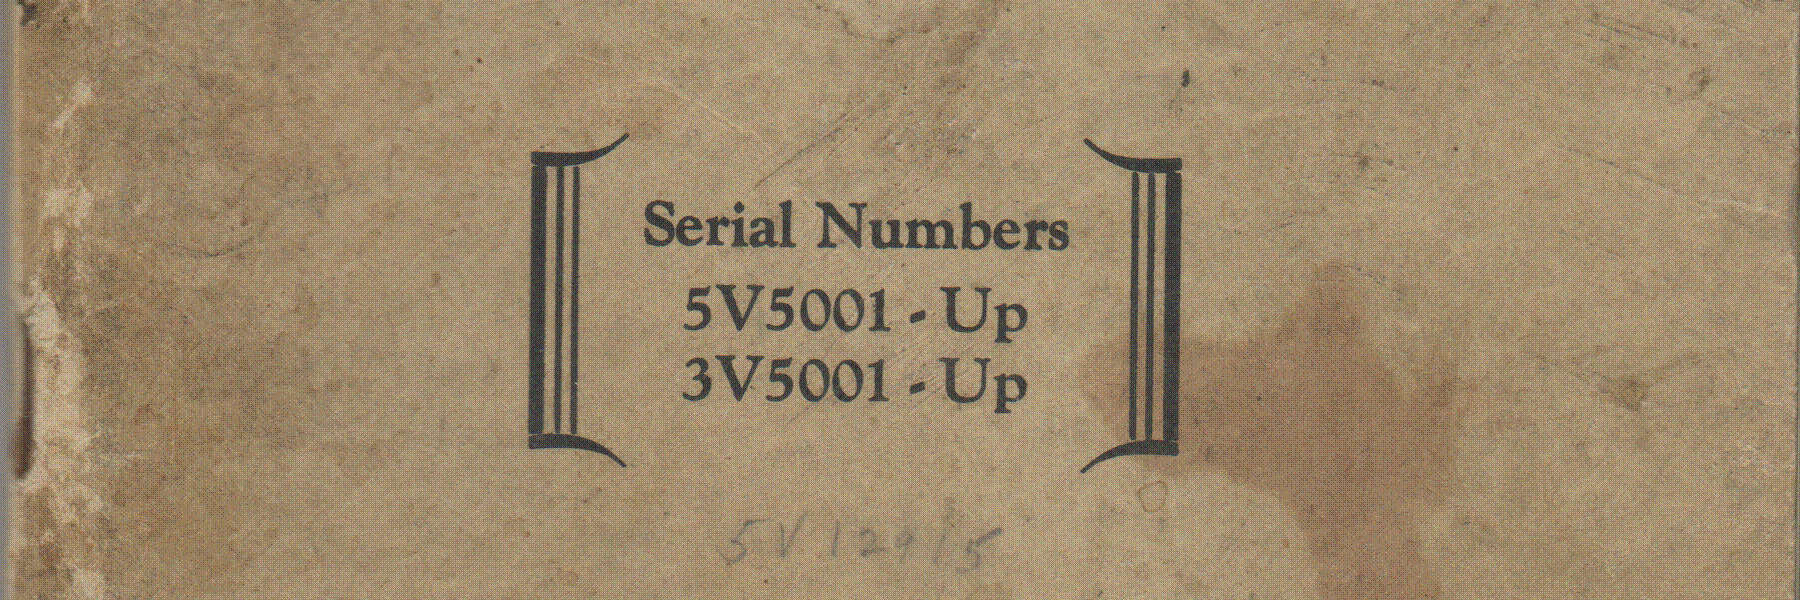 Close-up of the cover of the Operator's Instructions for Caterpillar Diesel D318 Engine and Electric Set (Serial numbers 5V5001 - Up, 3V5001 - Up). Scanned image manipulated with dithering.